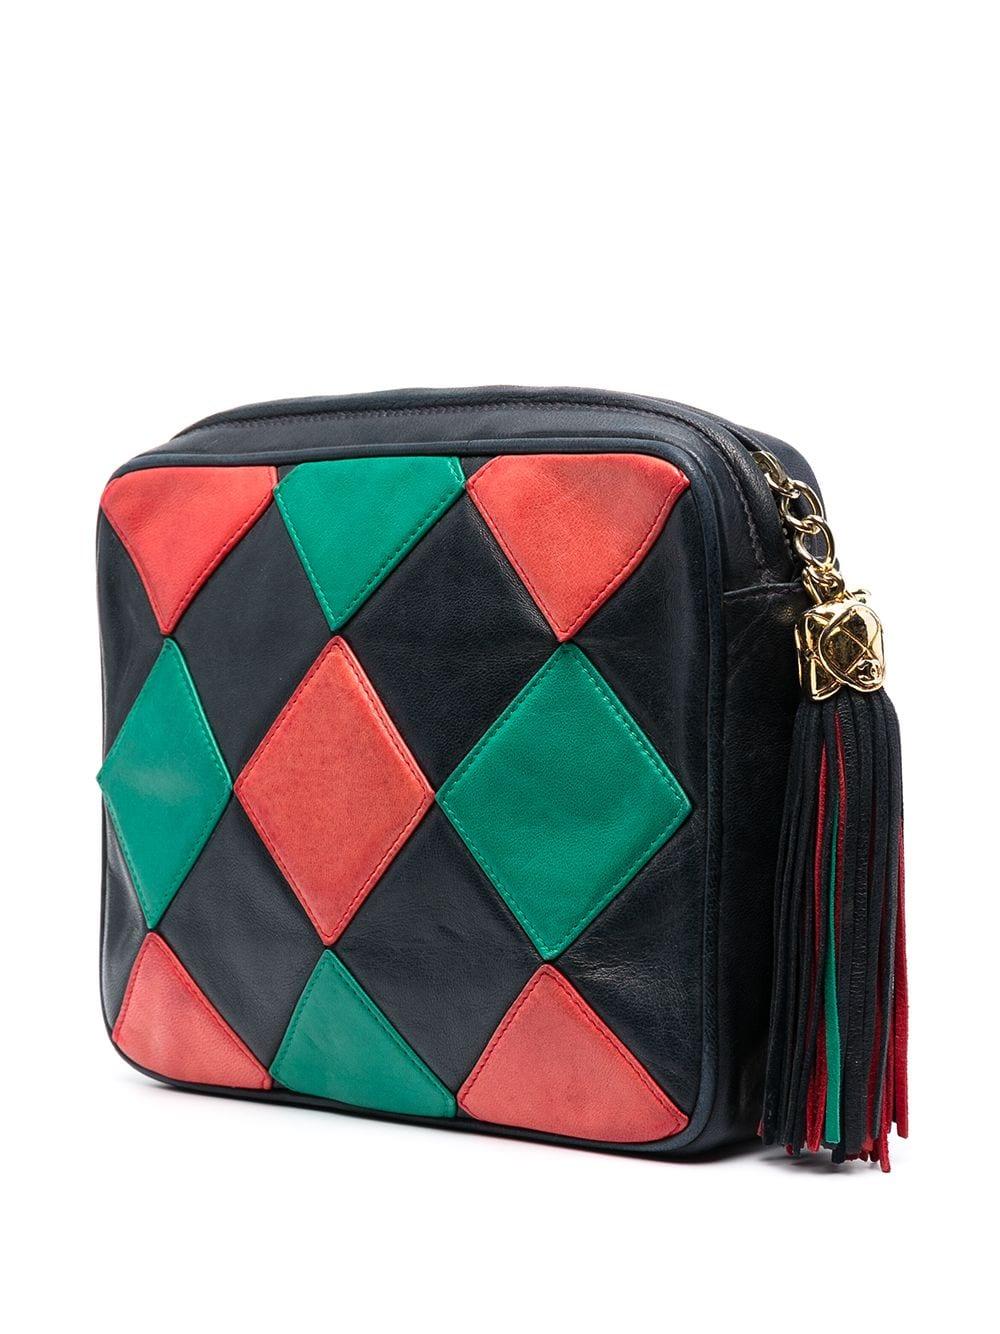 Beautiful vintage Limited Edition camera bag from Chanel. Featuring a retro red and green diamond patchwork design, with a matching large tassel featuring the iconic interlocking CC logo in gold-tone metal accents. The large compartment opens up to